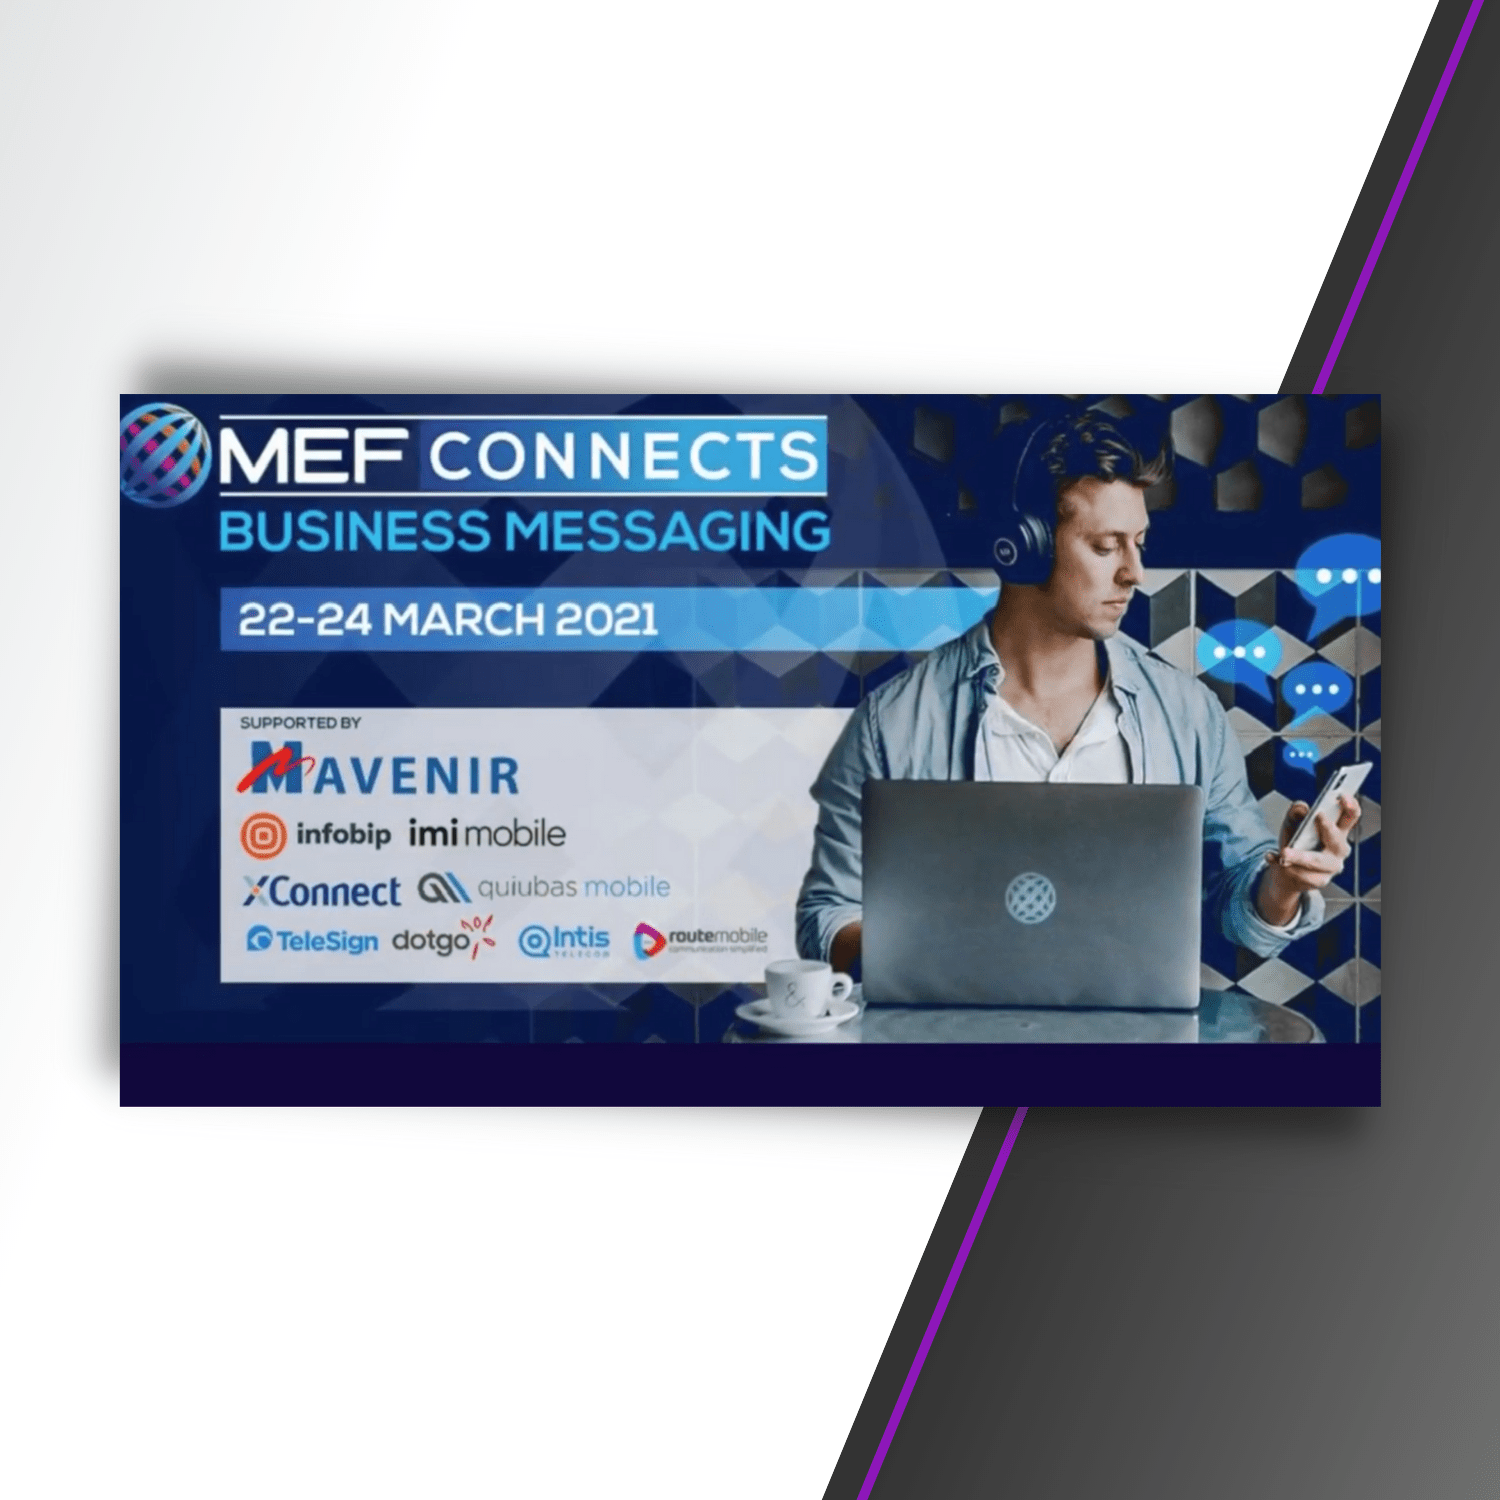 MEF: RCS Vendors Renew Efforts to Deliver a Truly Interconnected Experience